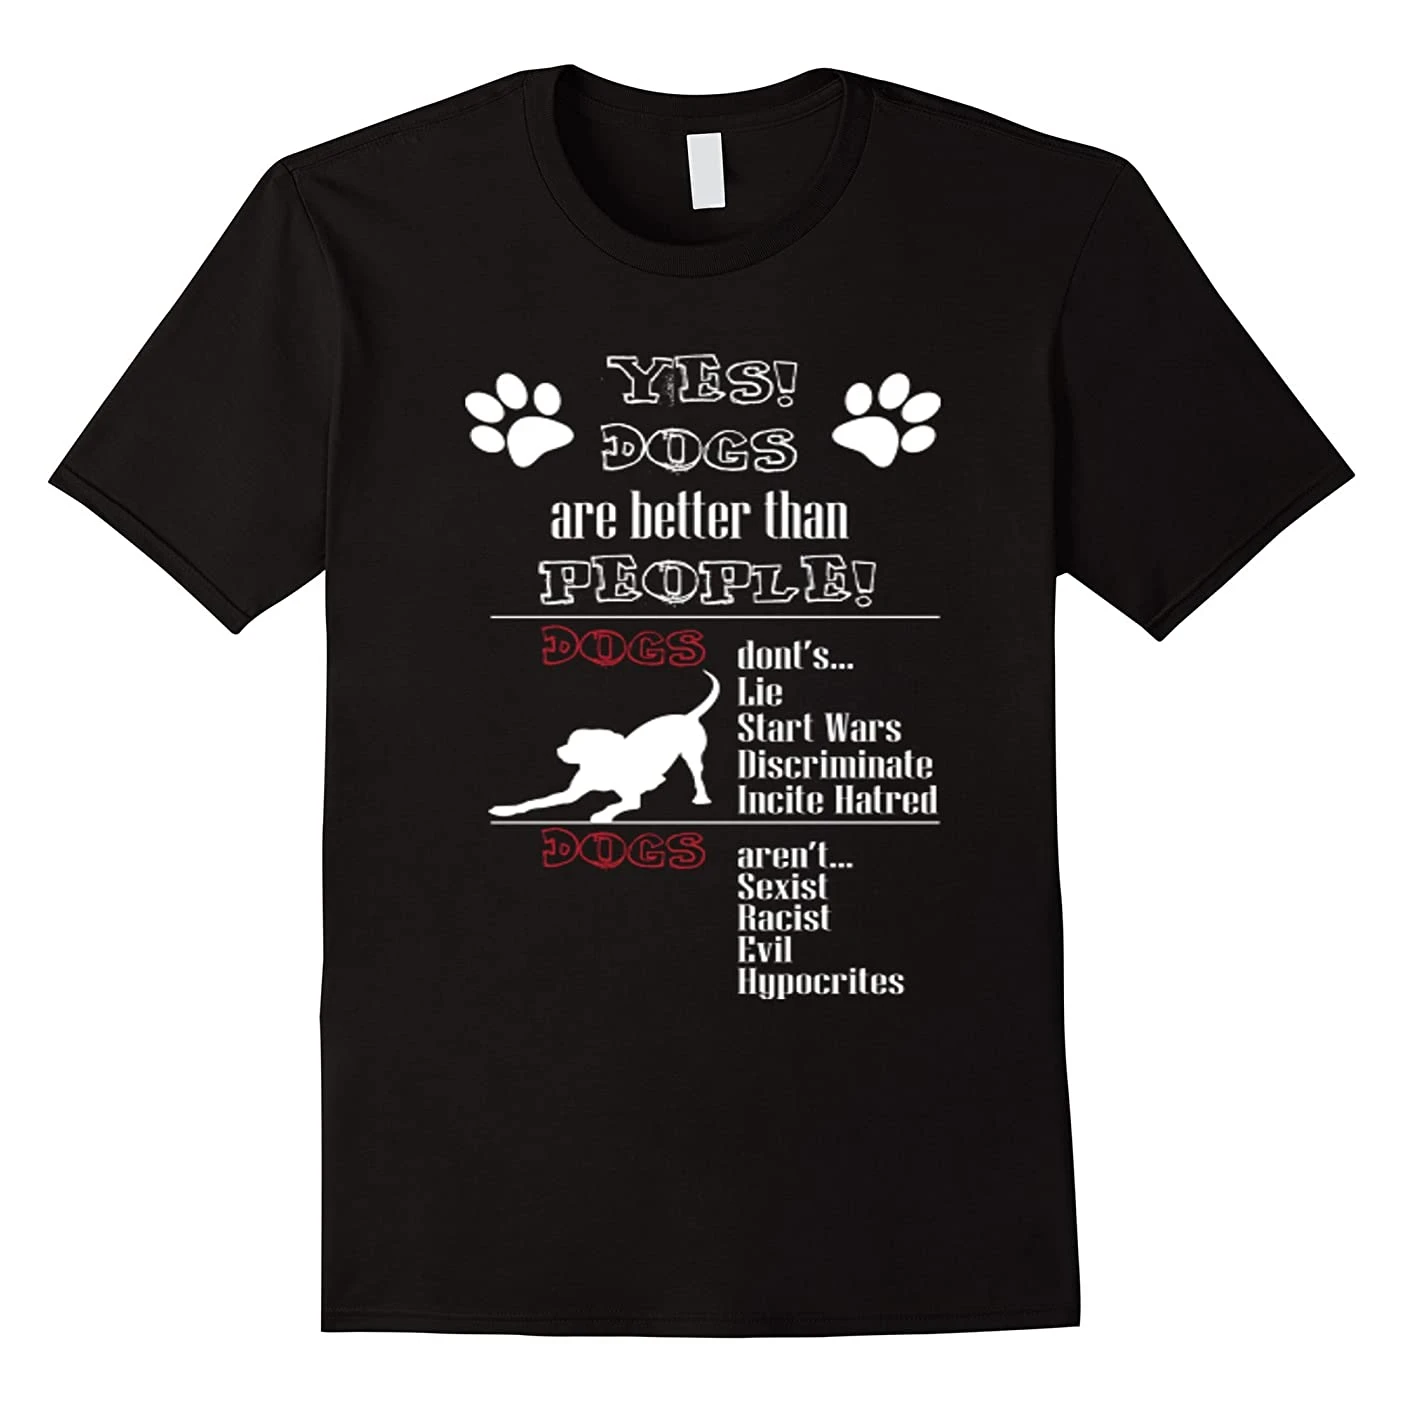 

Yes Dogs Are Better Than People. Funny Dog Lovers Gift T Shirt. New 100% Cotton Short Sleeve O-Neck Casual T-shirts Size S-3XL